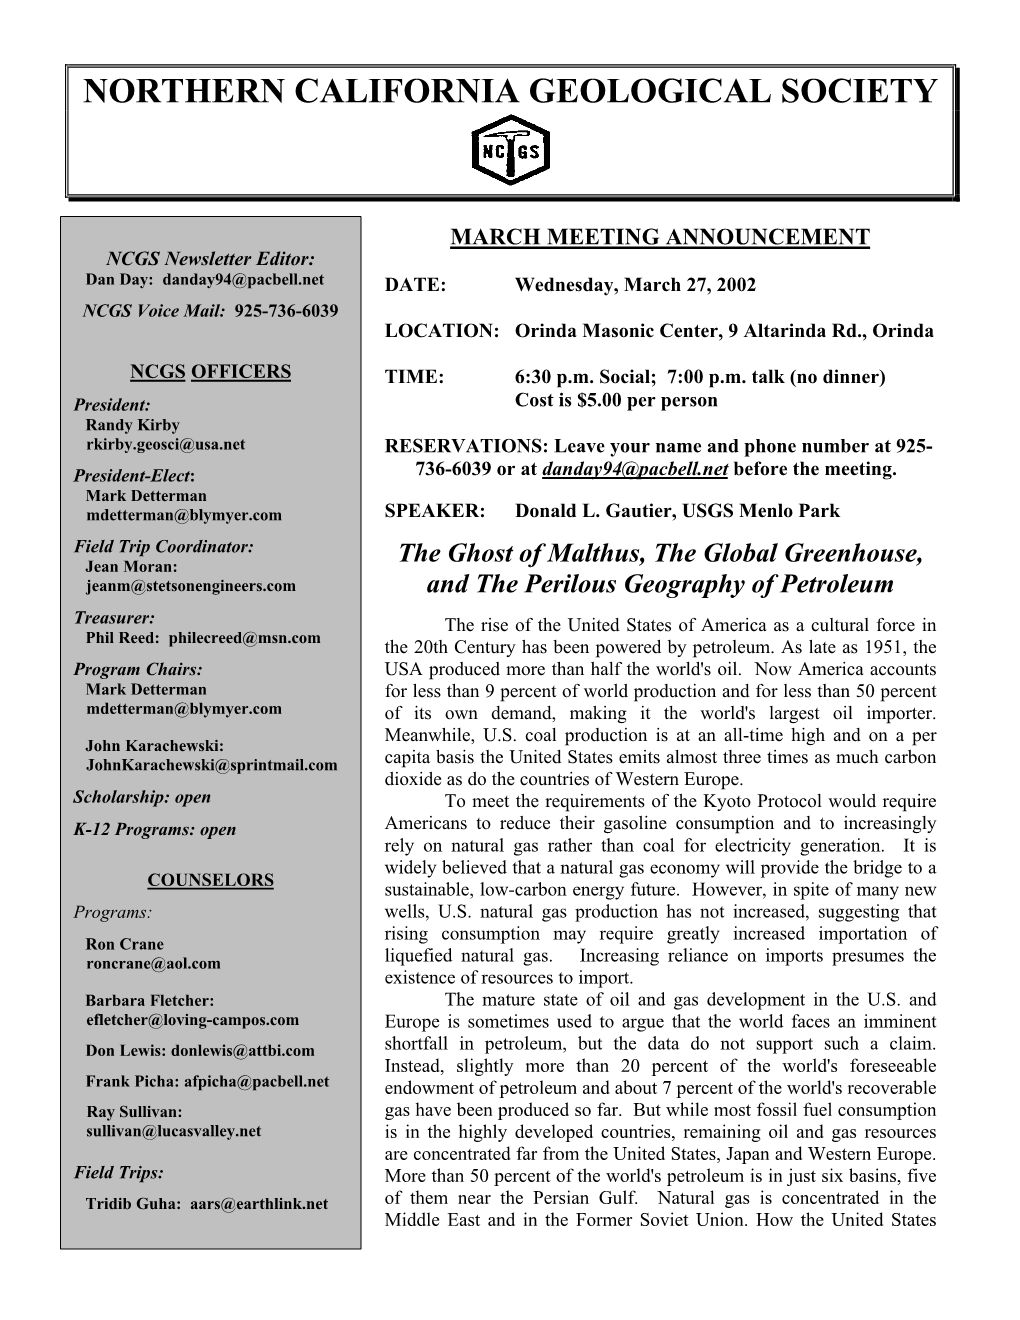 NCGS March 2002 Newsletter